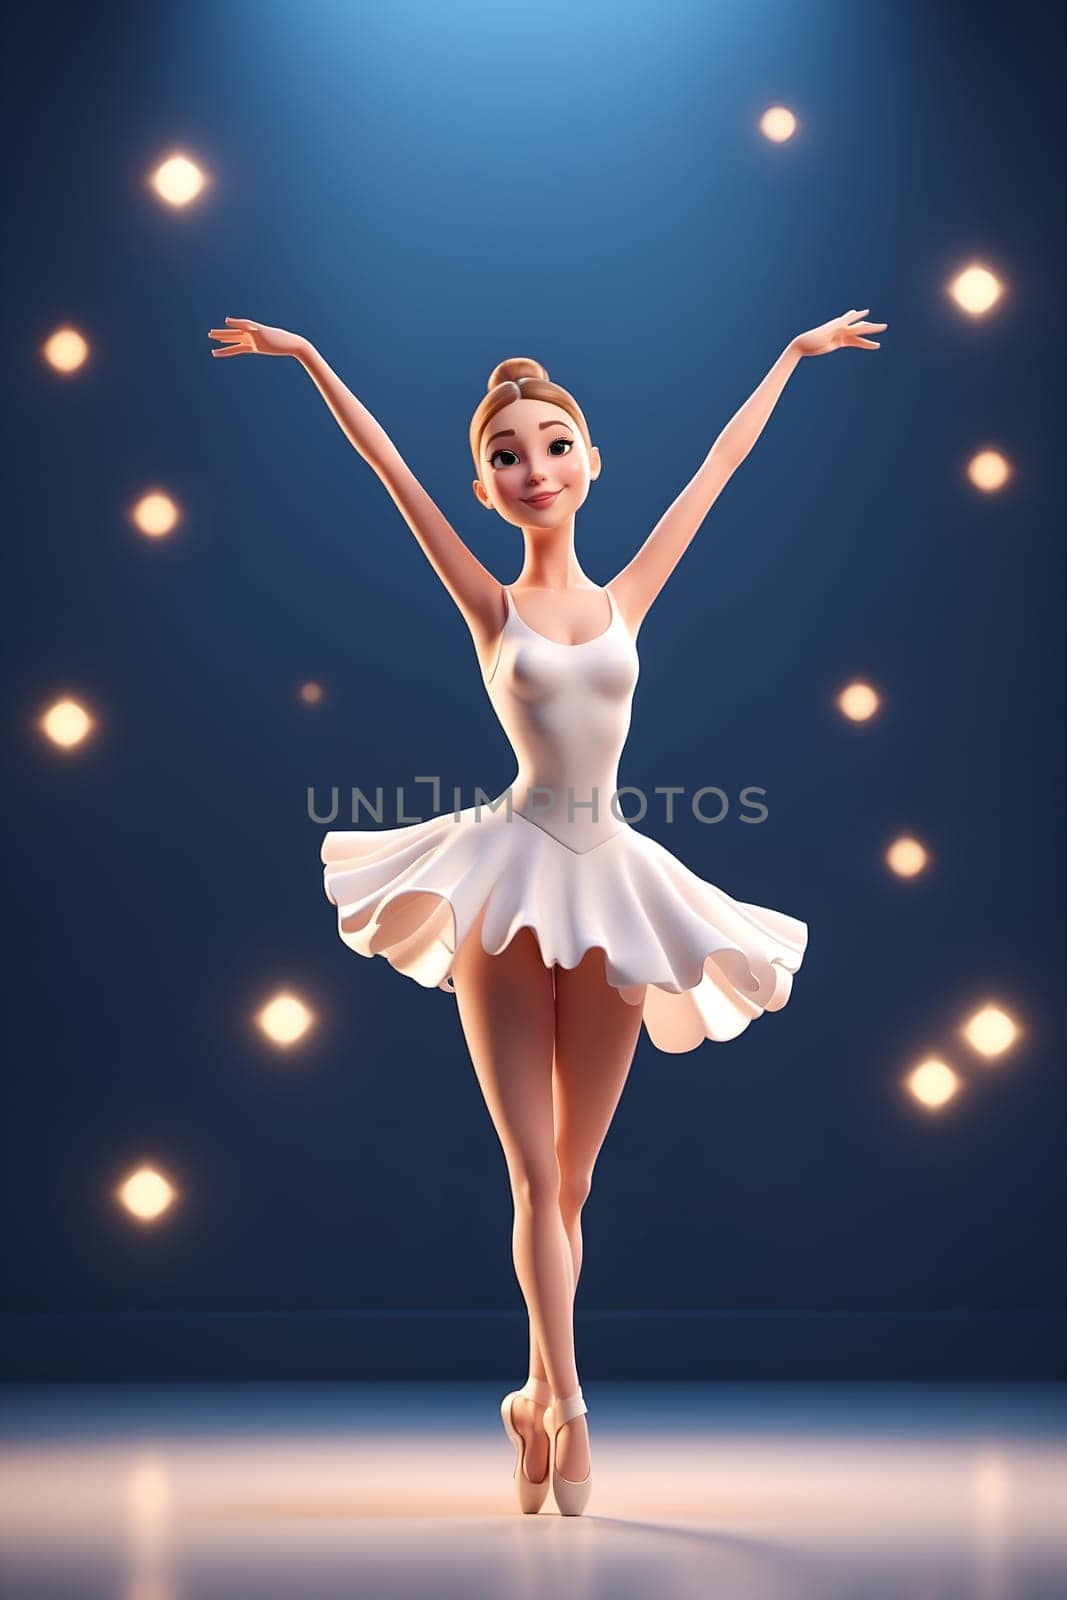 A talented ballerina in a white dress gracefully performs on a stage, showcasing her elegant and poised dance movements.